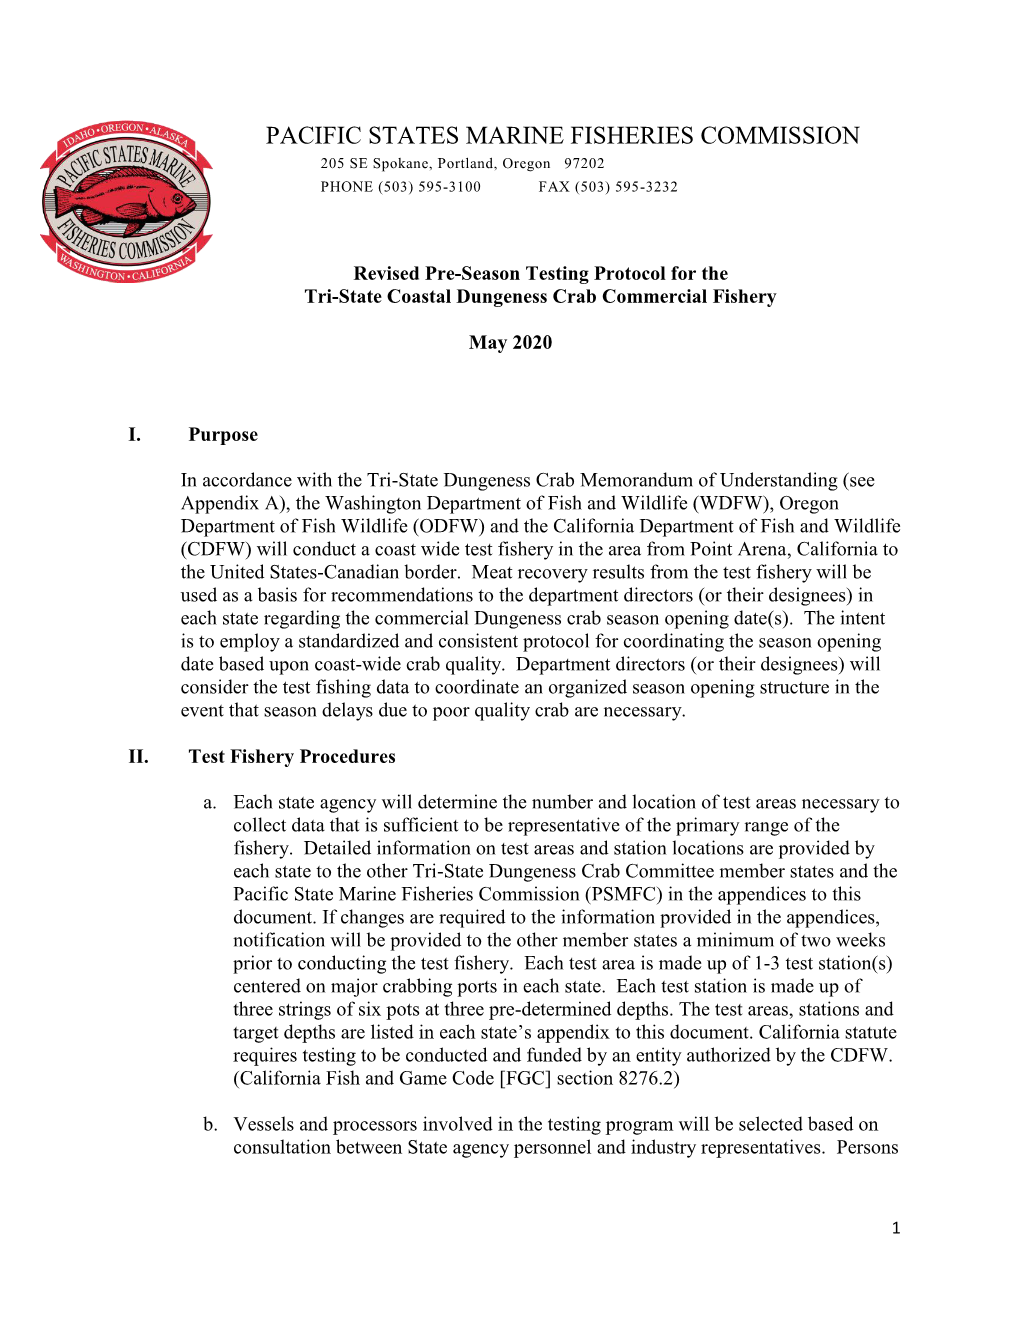 Revised Pre-Season Testing Protocol for the Tri-State Coastal Dungeness Crab Commercial Fishery